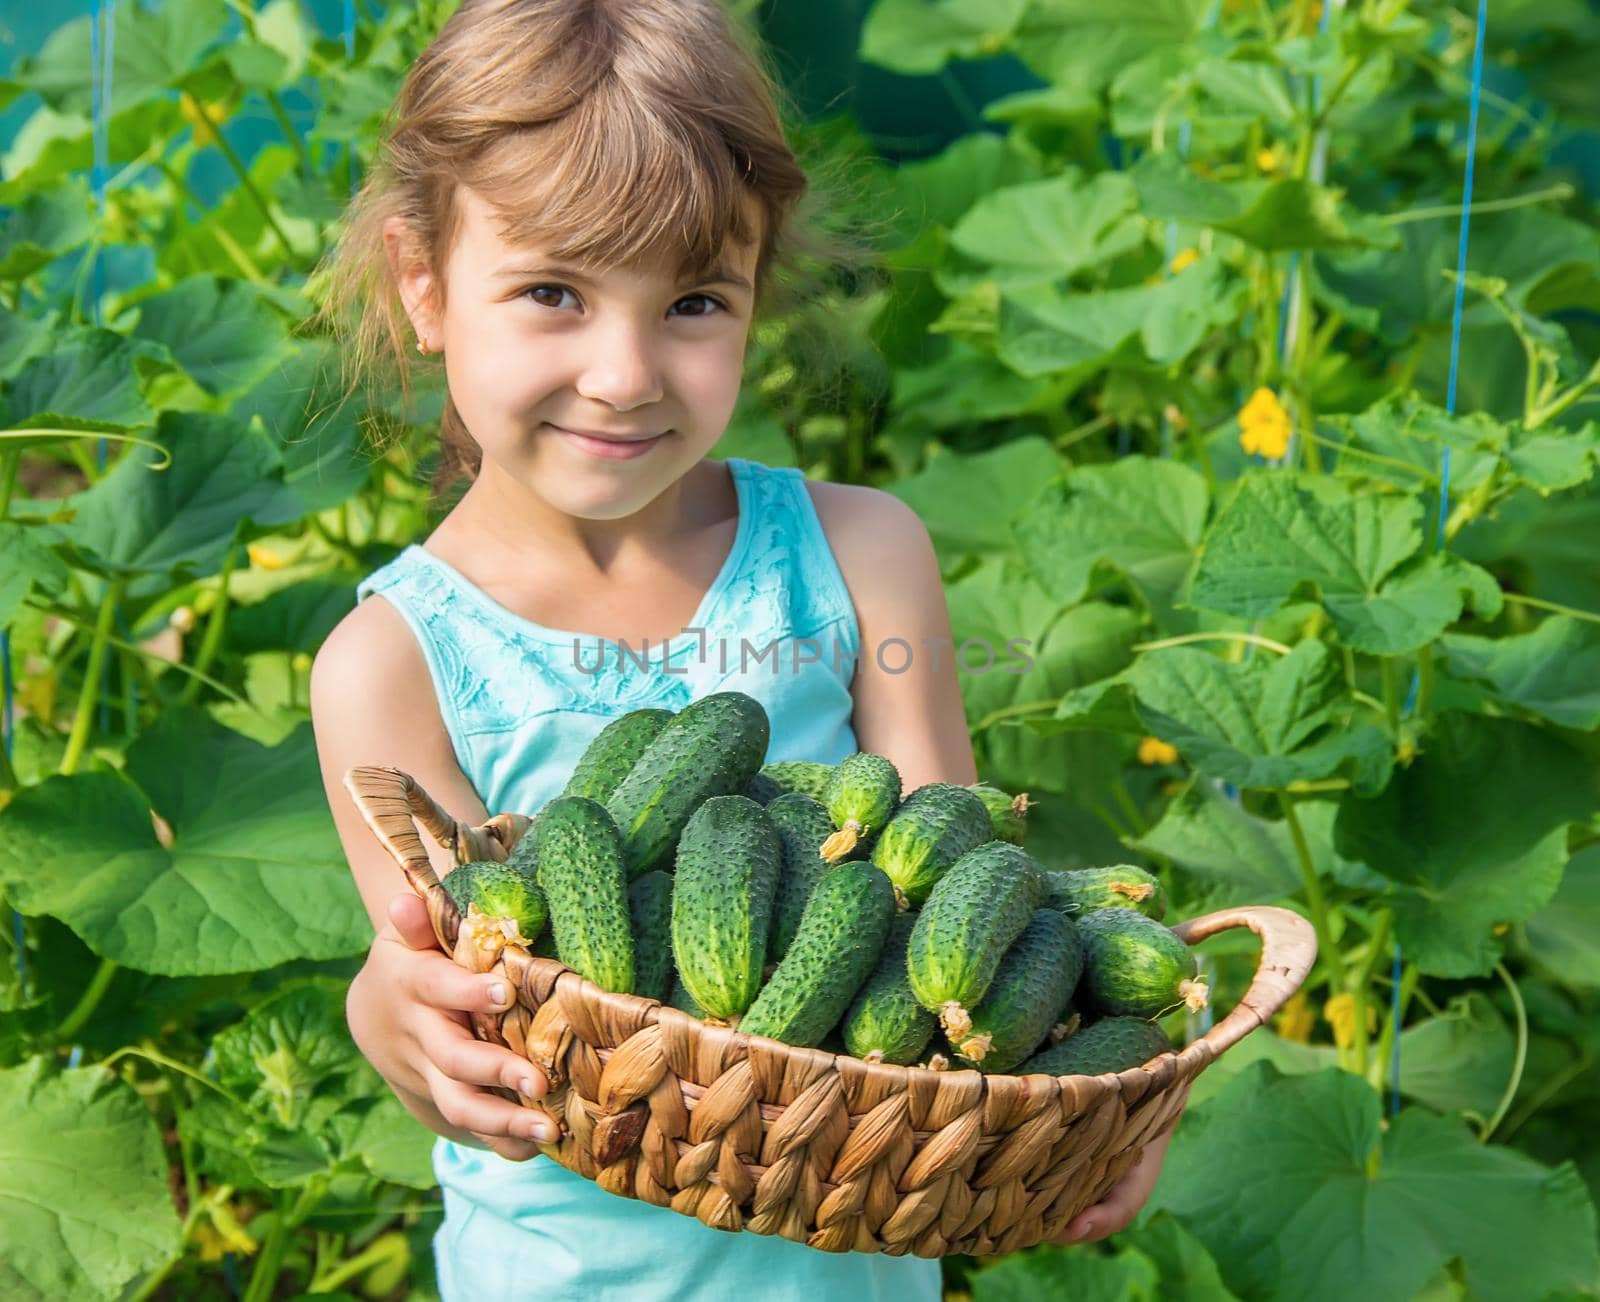 homemade cucumber cultivation and harvest in the hands